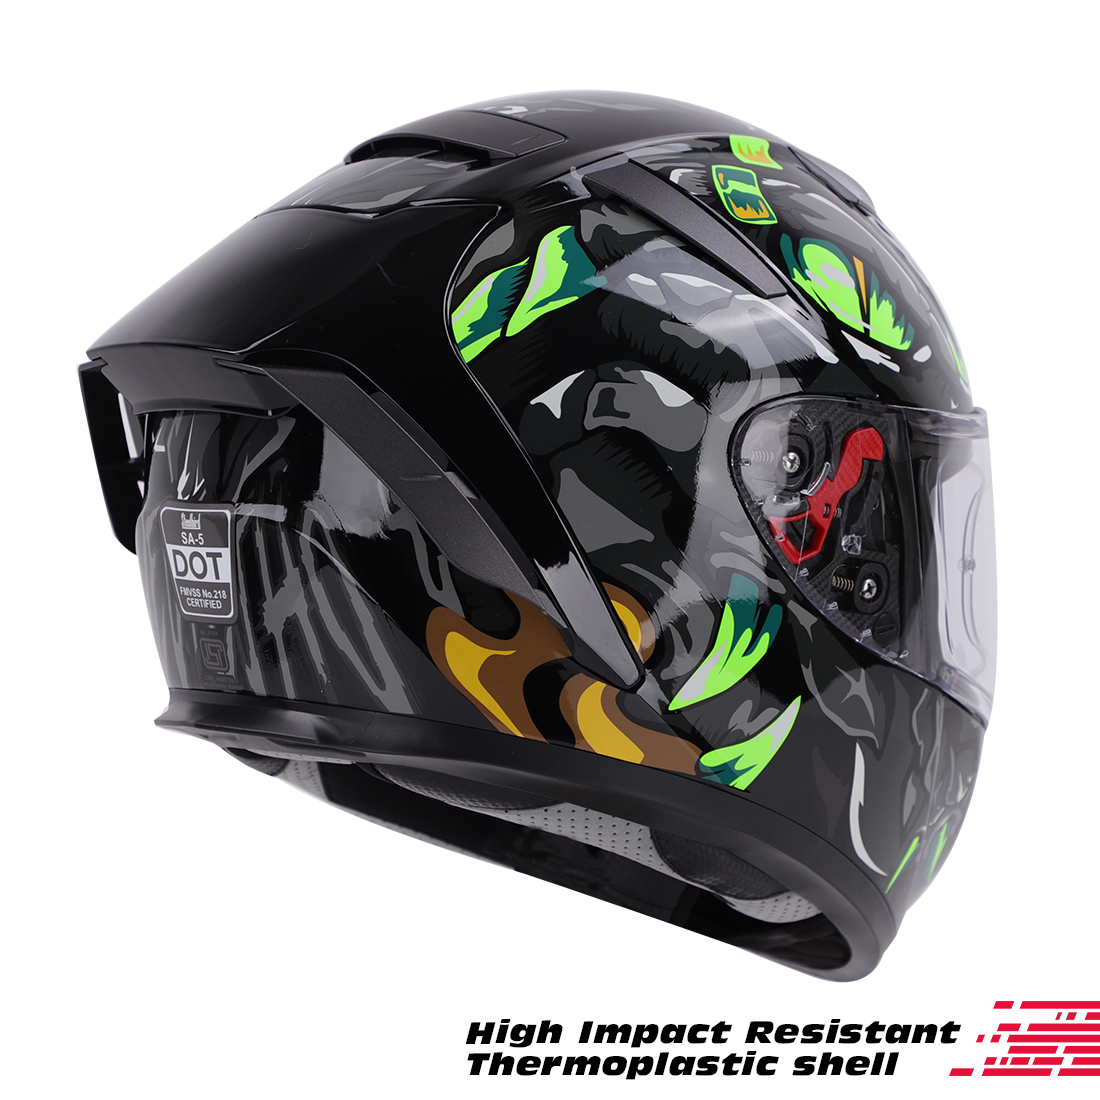 Steelbird SA-5 Monster ISI/DOT Certified Full Face Graphic Helmet With Outer Anti-Fog Clear Visor (Glossy Black Grey)